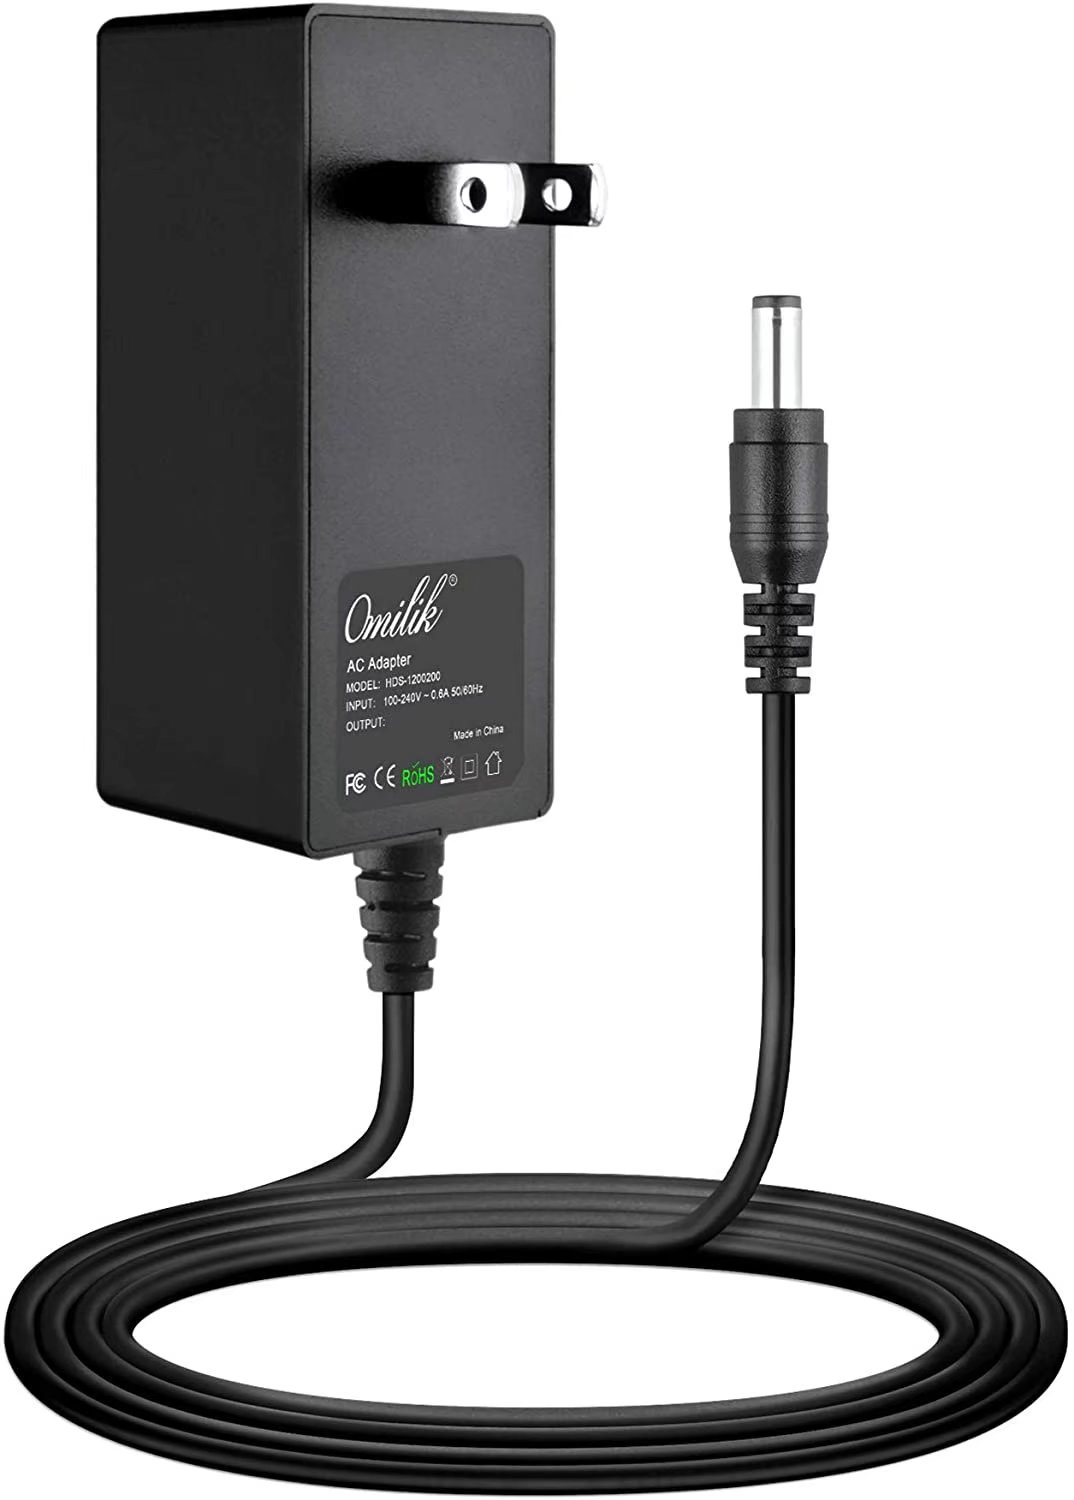 Omilik AC Adapter compatible with Electrohome Archer Vinyl Record Player EANOS300 EANOS300S Power - image 1 of 3